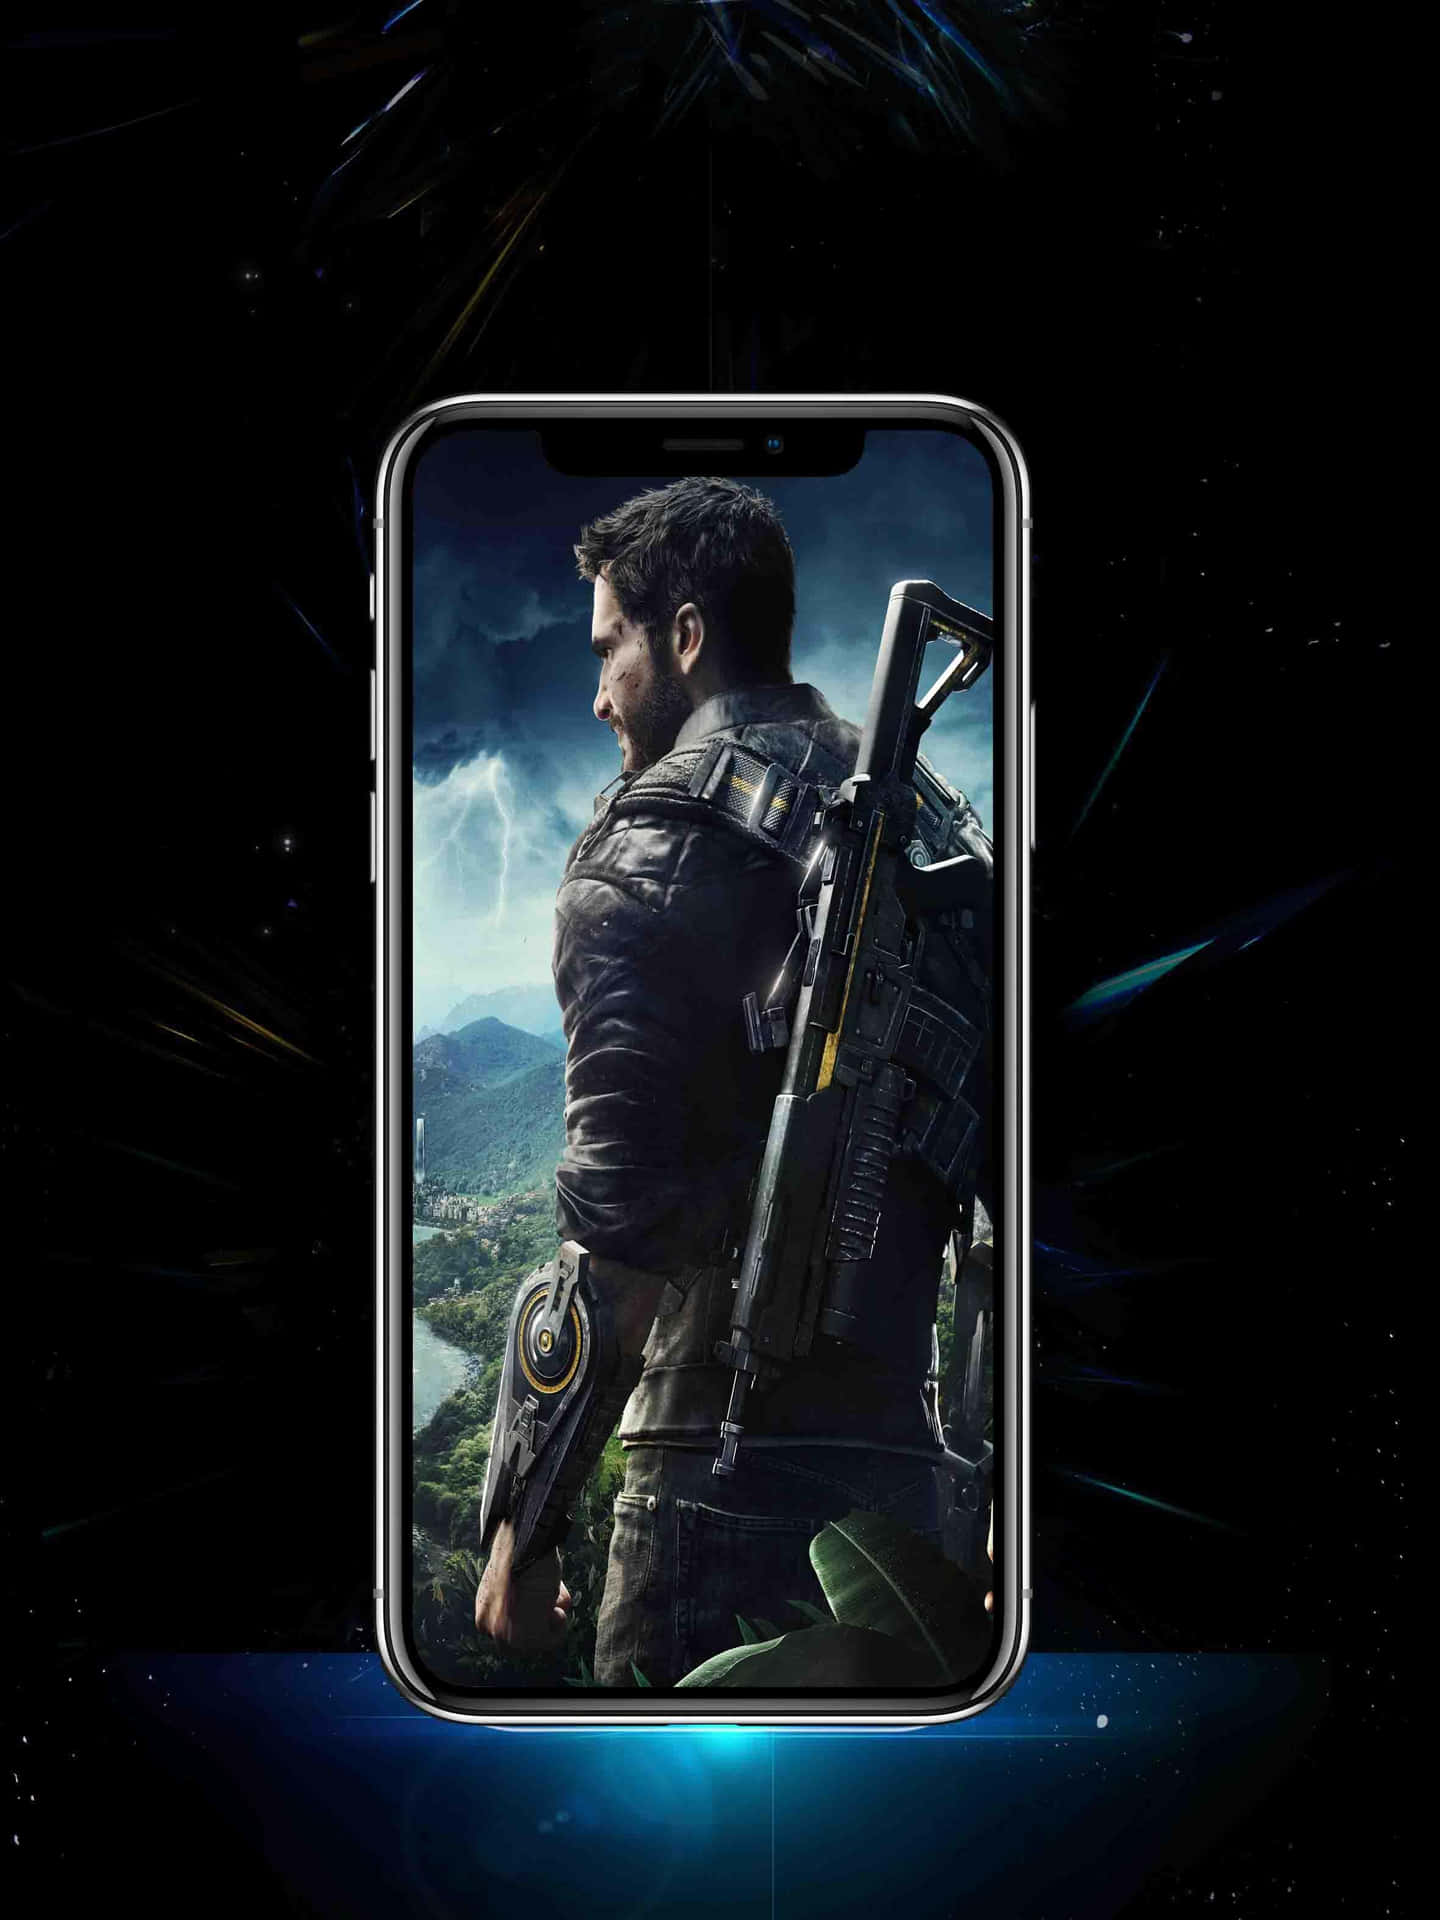 Explore the New Open-World of Just Cause 4 on Android